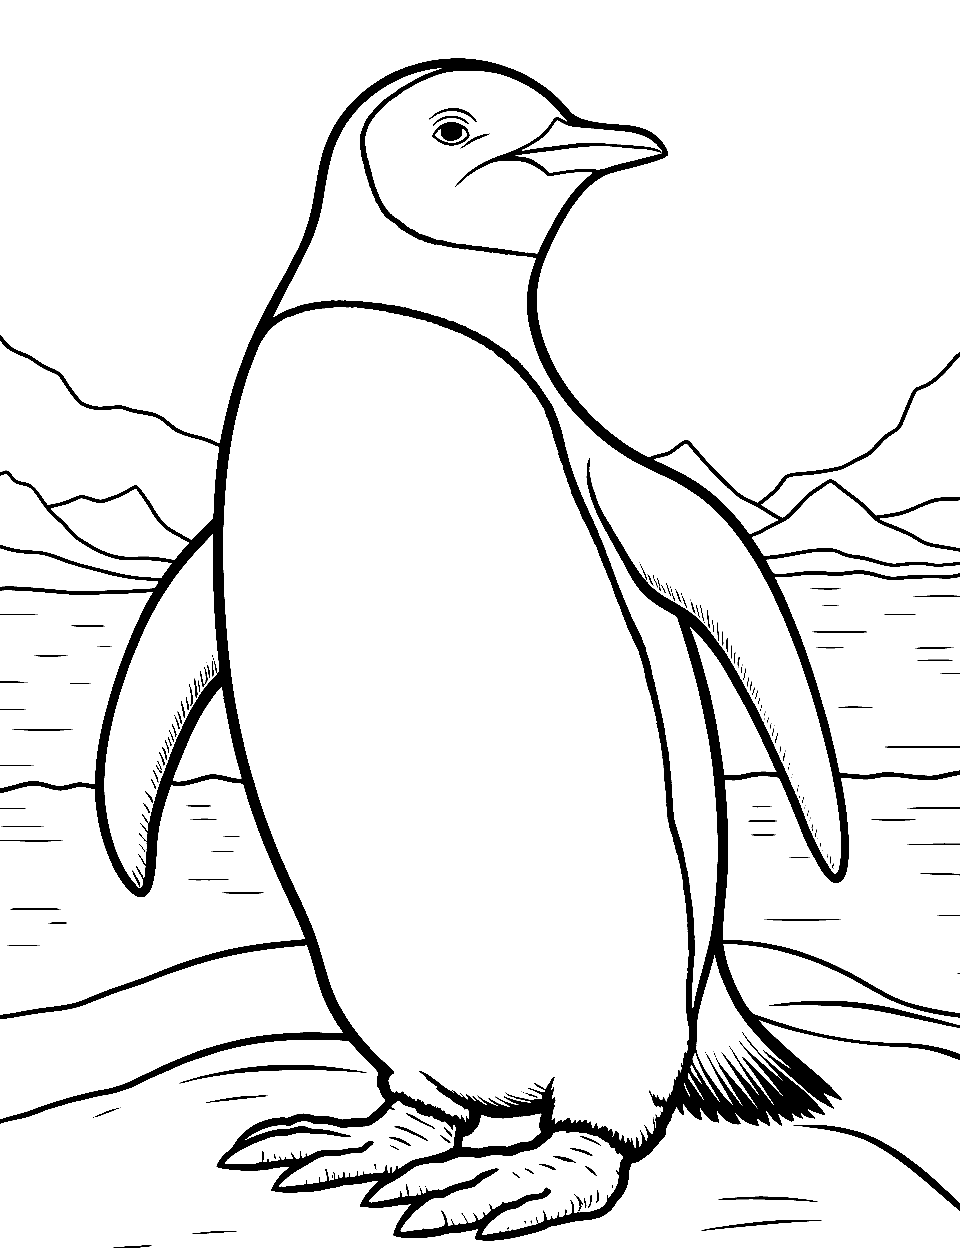 Majestic King Penguin Coloring Page - A king penguin with distinctive colorations on its plumage.